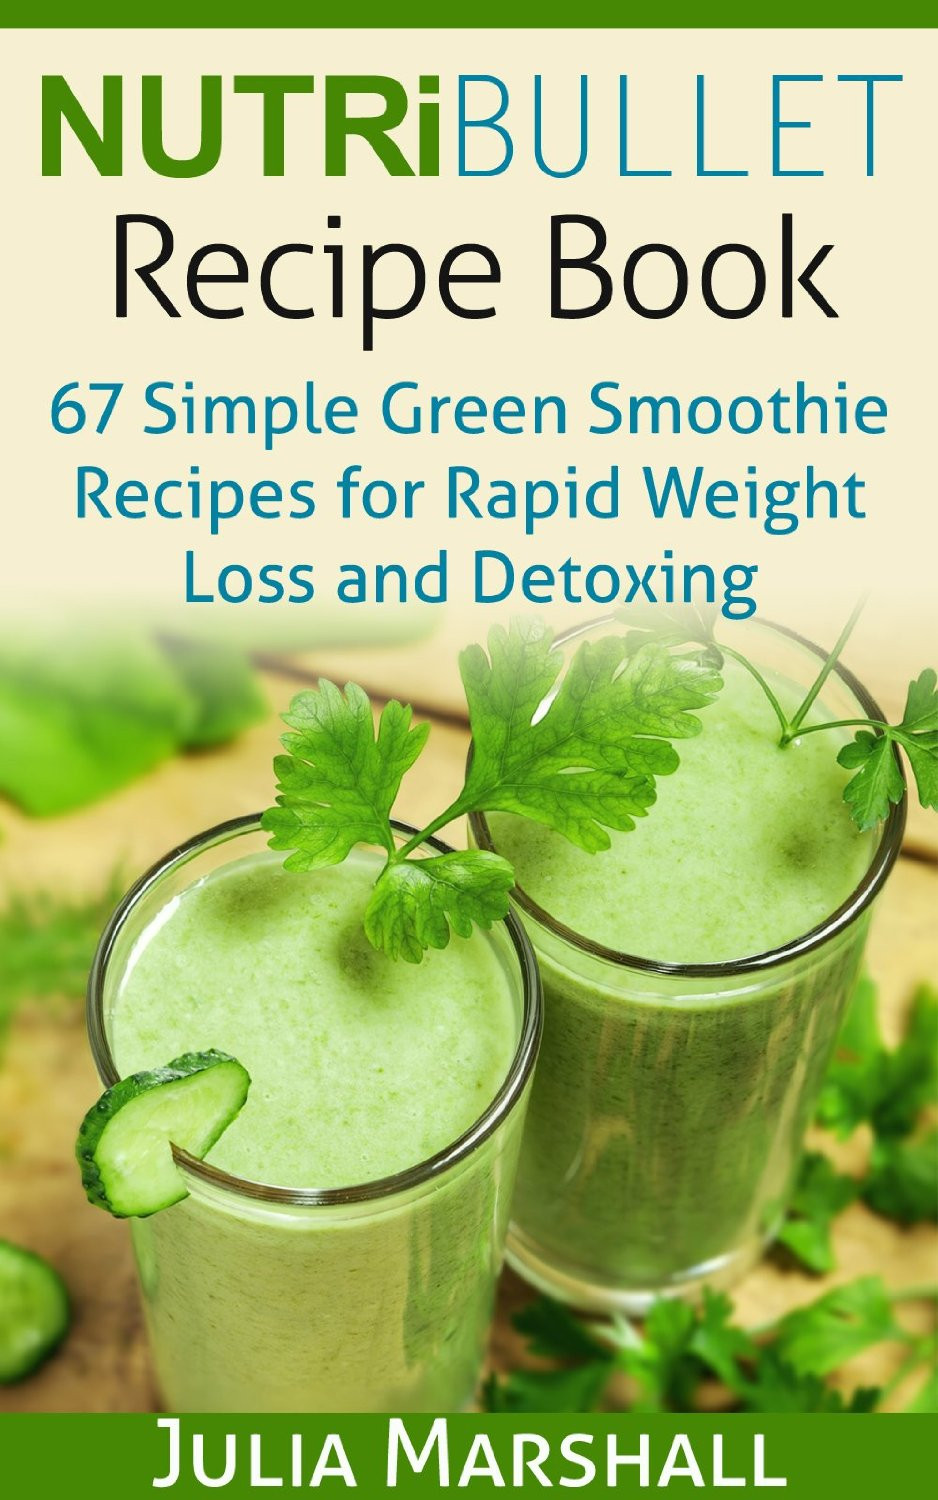 Weight Loss Recipes Book
 NutriBullet Recipe Book 67 Green Smoothie Recipes for